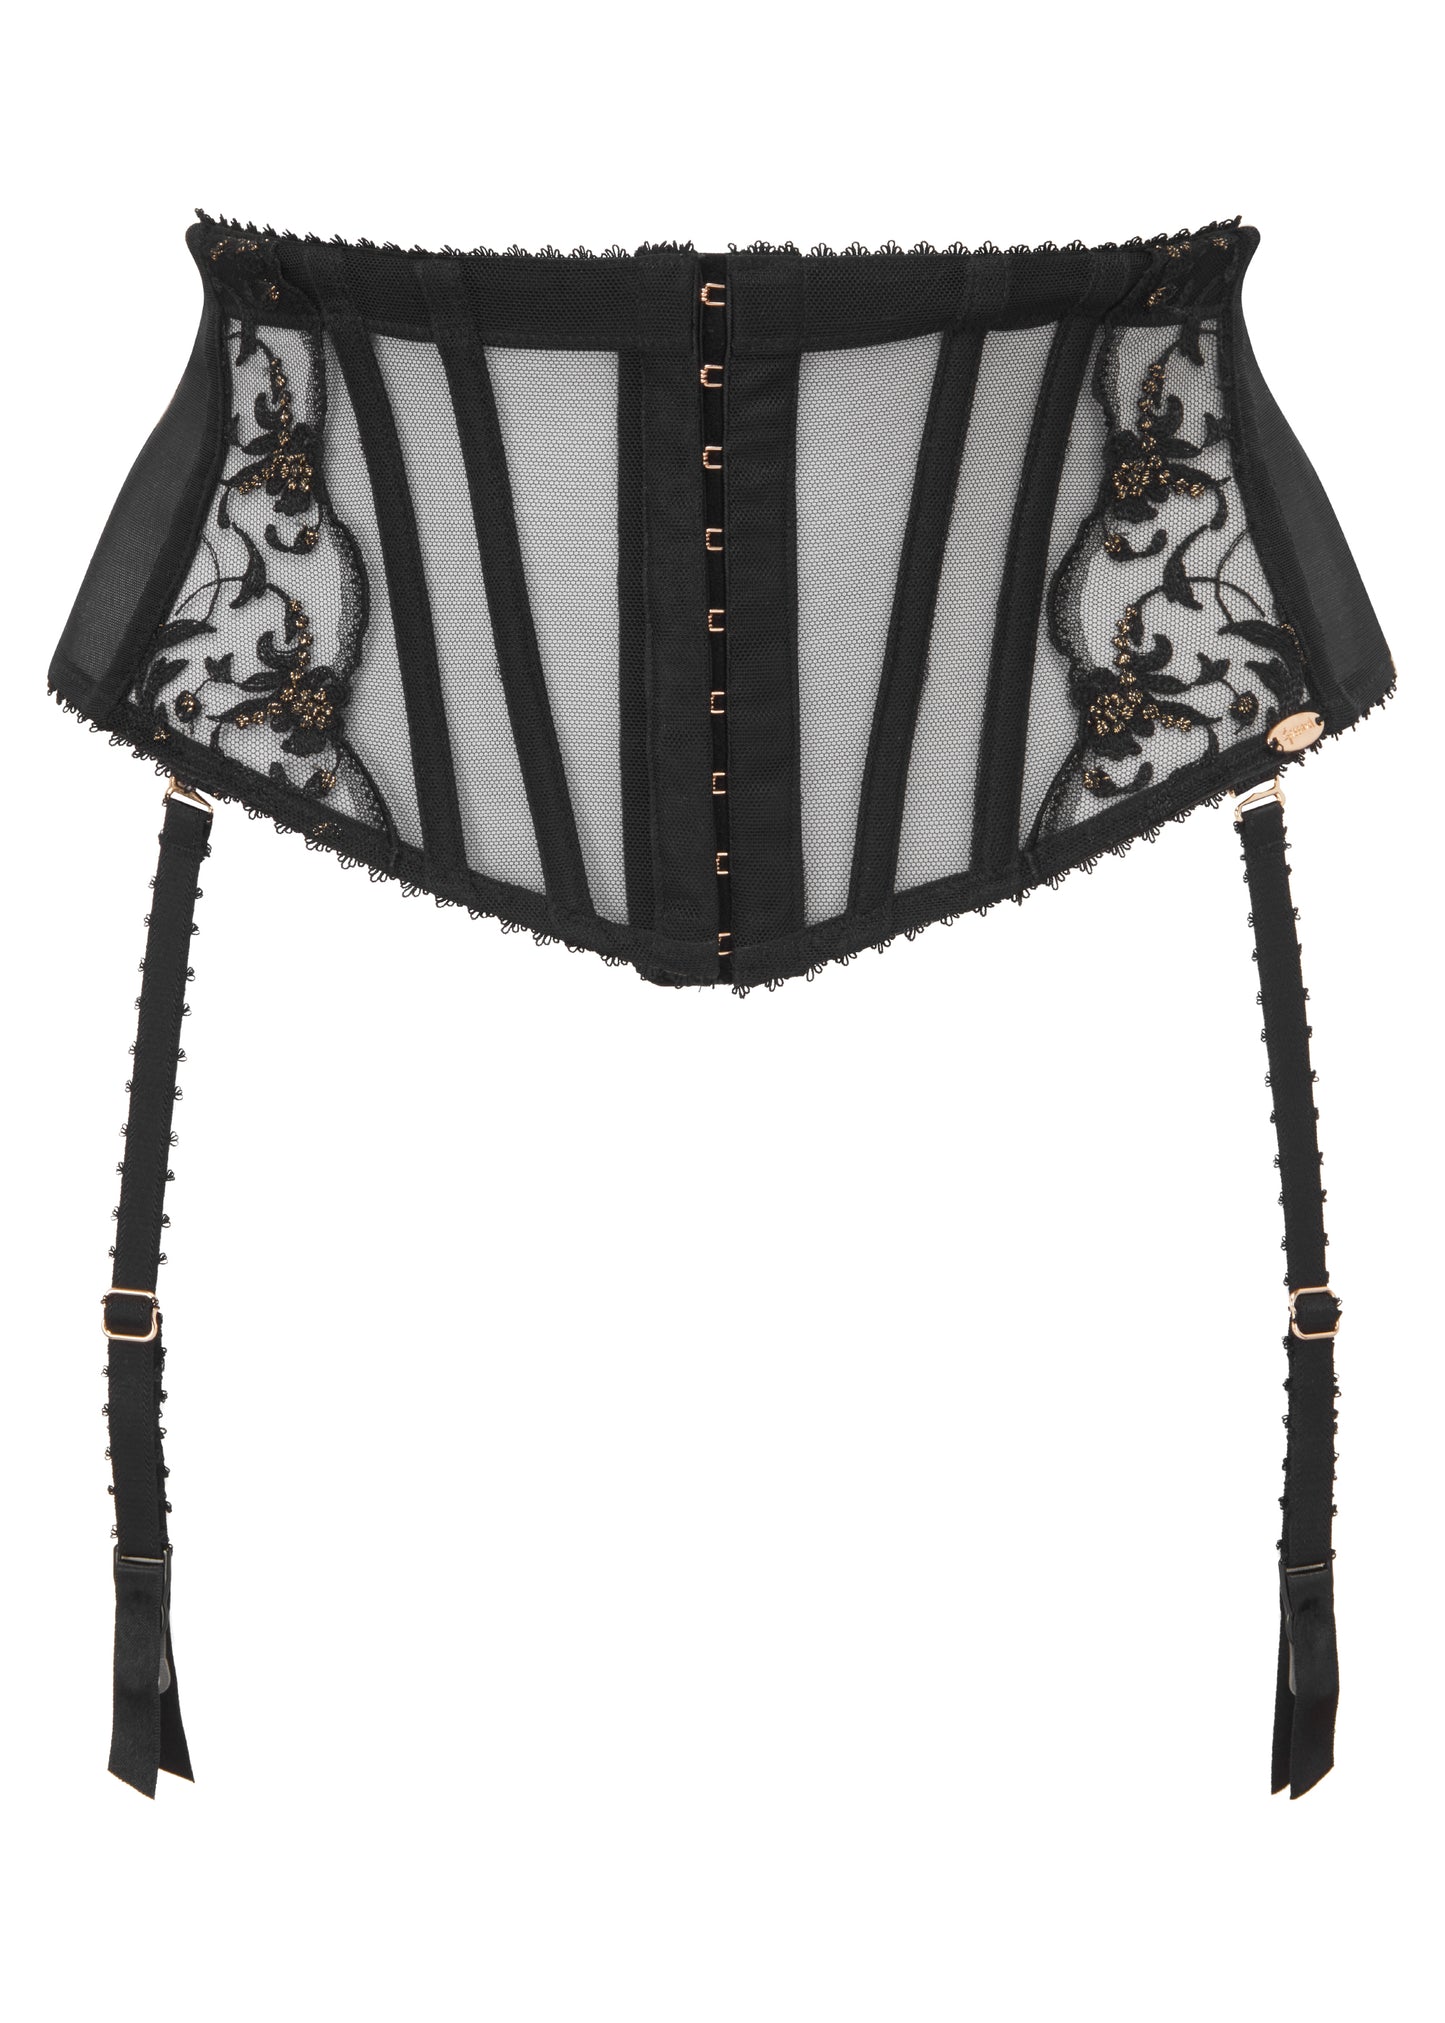 VIP Taboo Waspie Suspender - Black with Gold